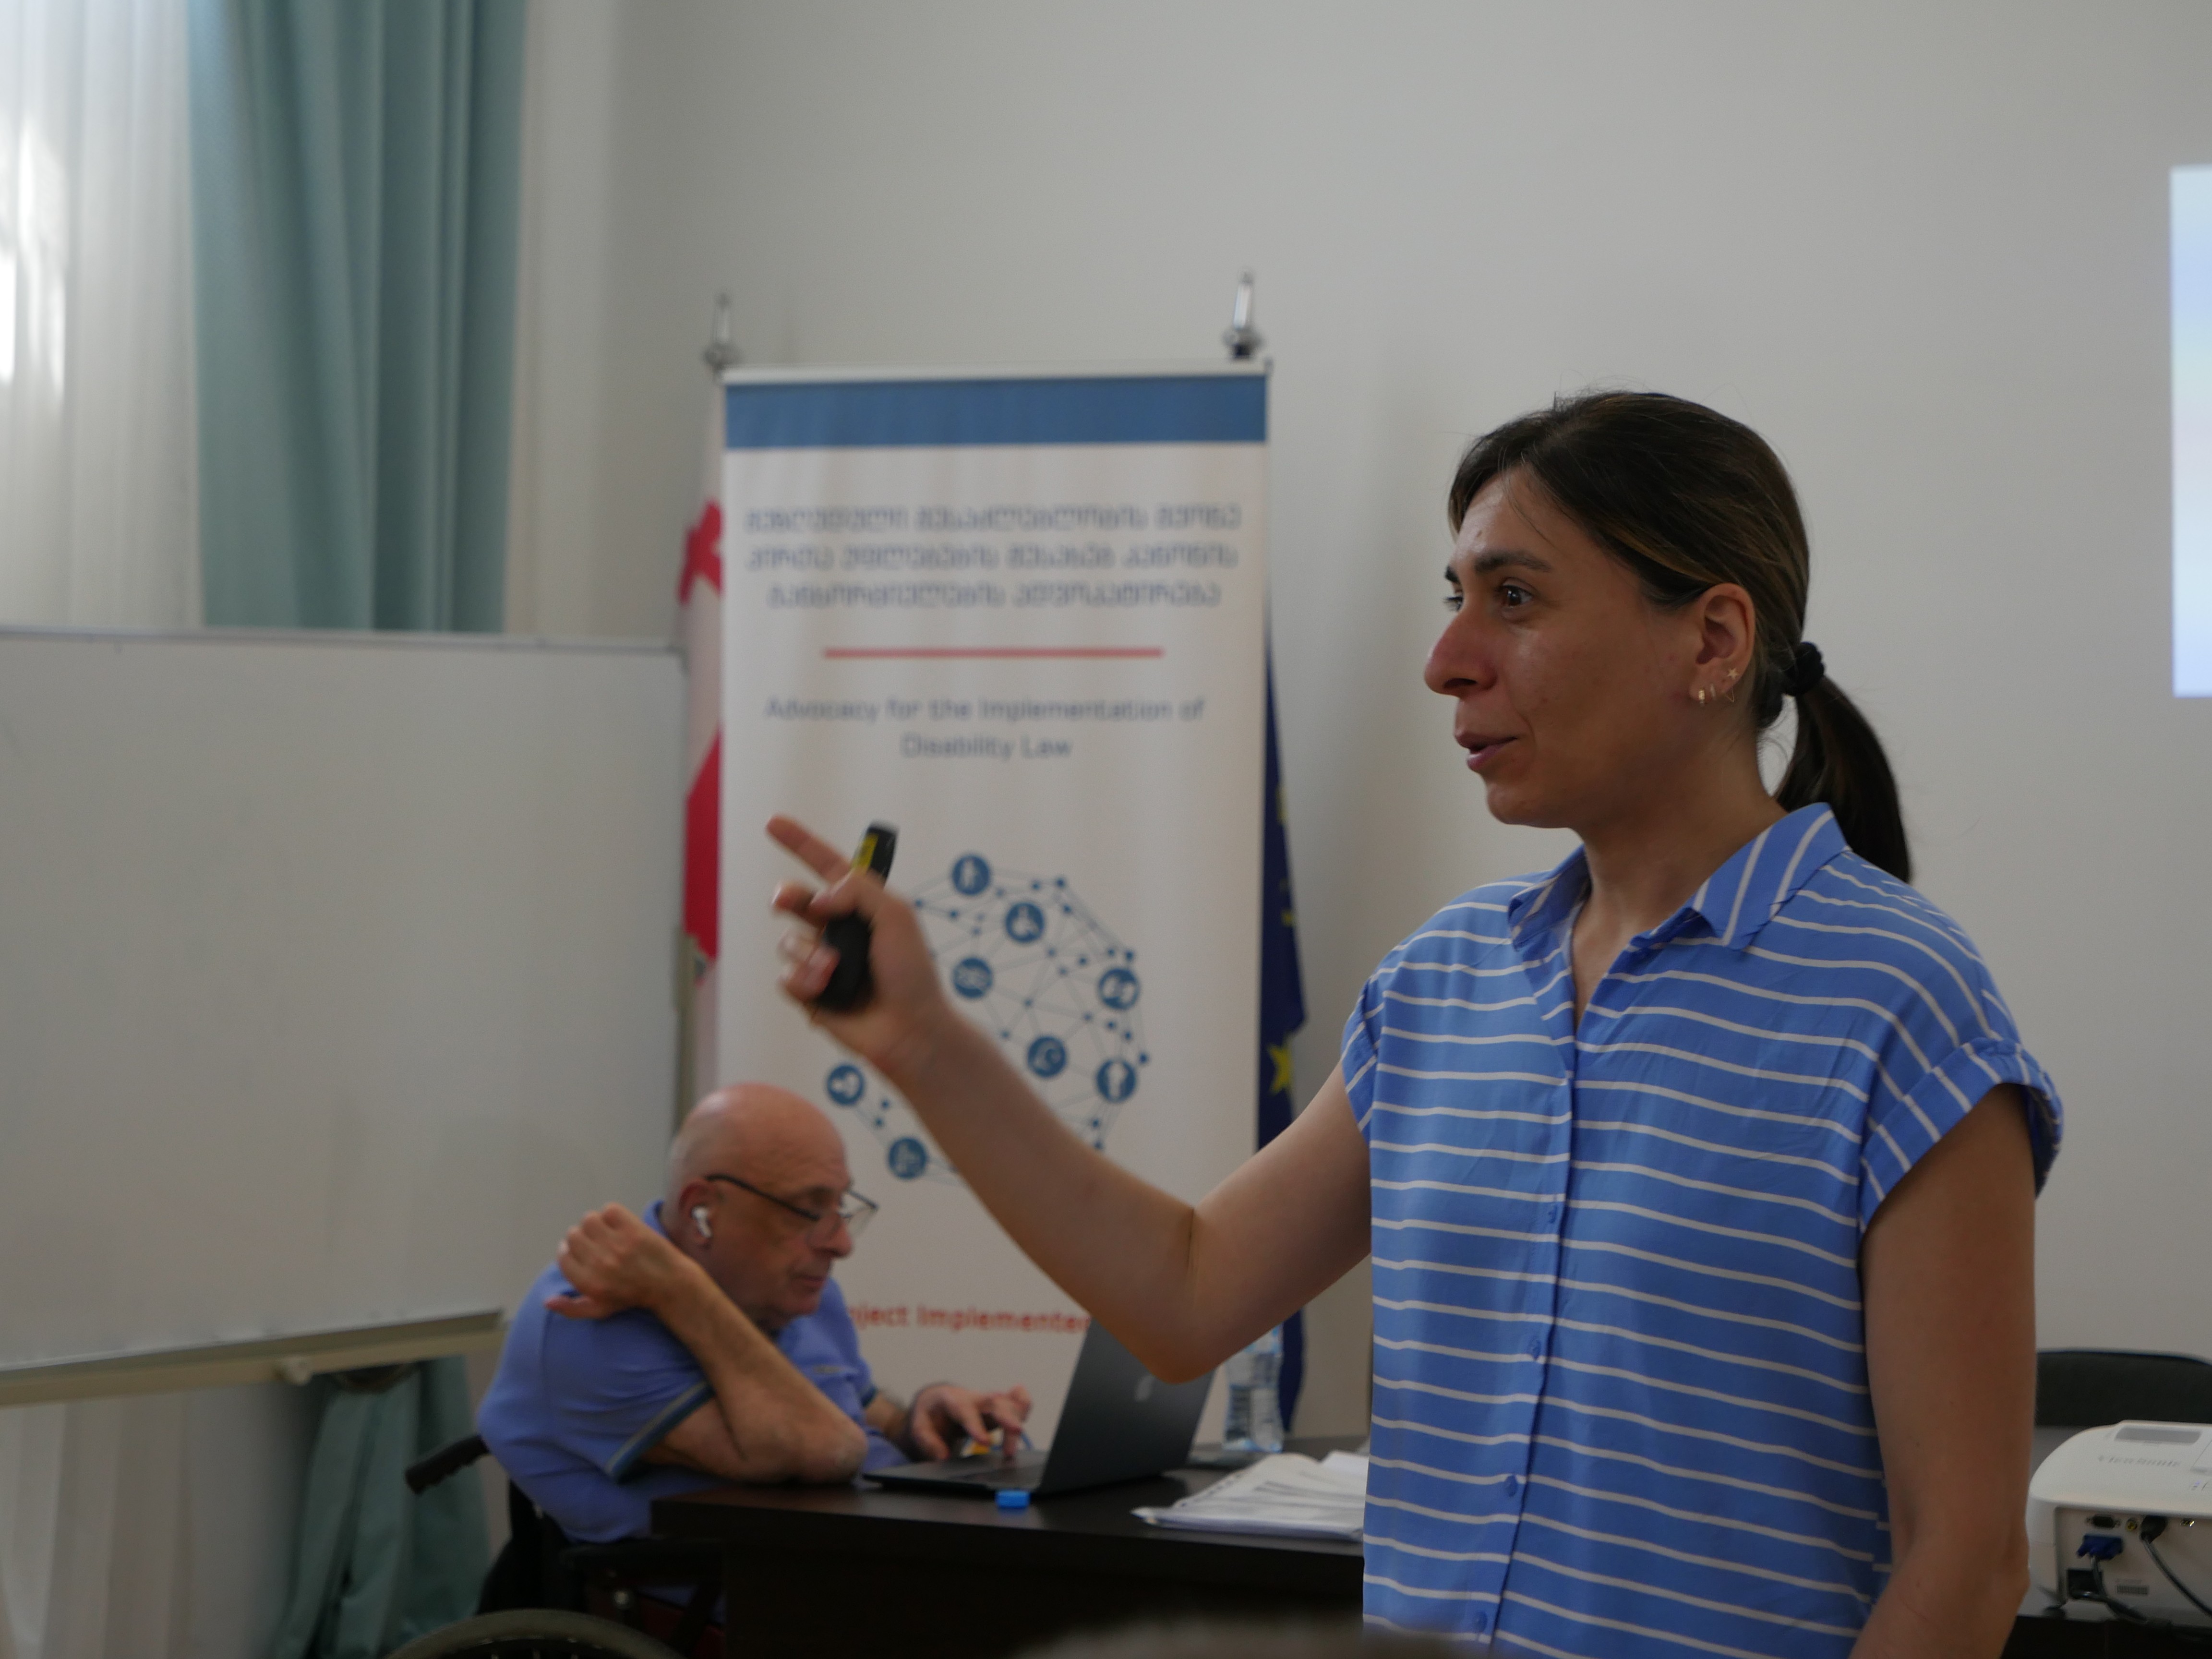 TRAINING ON THE UN CONVENTION ON THE RIGHTS OF PERSONS WITH DISABILITIES